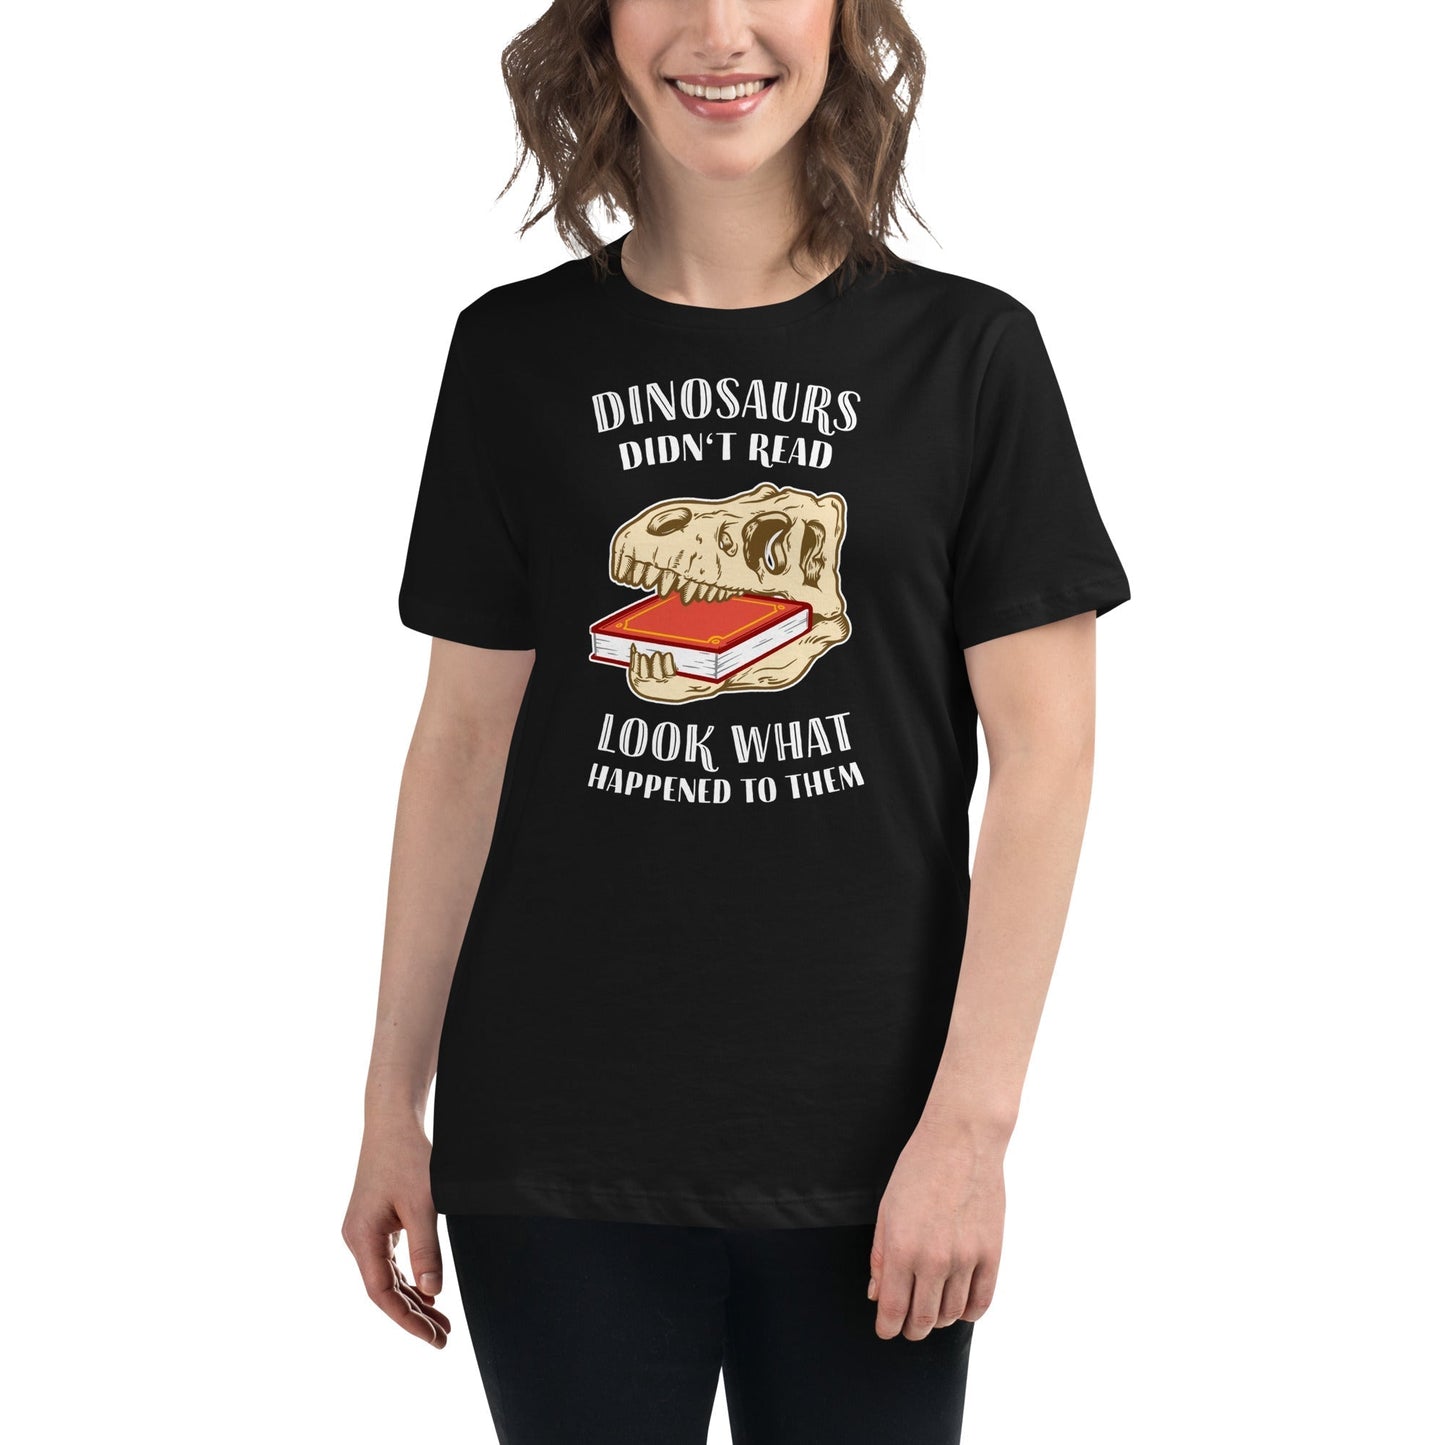 Dinosaurs Didn't Read - Look What Happened To Them - Women's T-Shirt